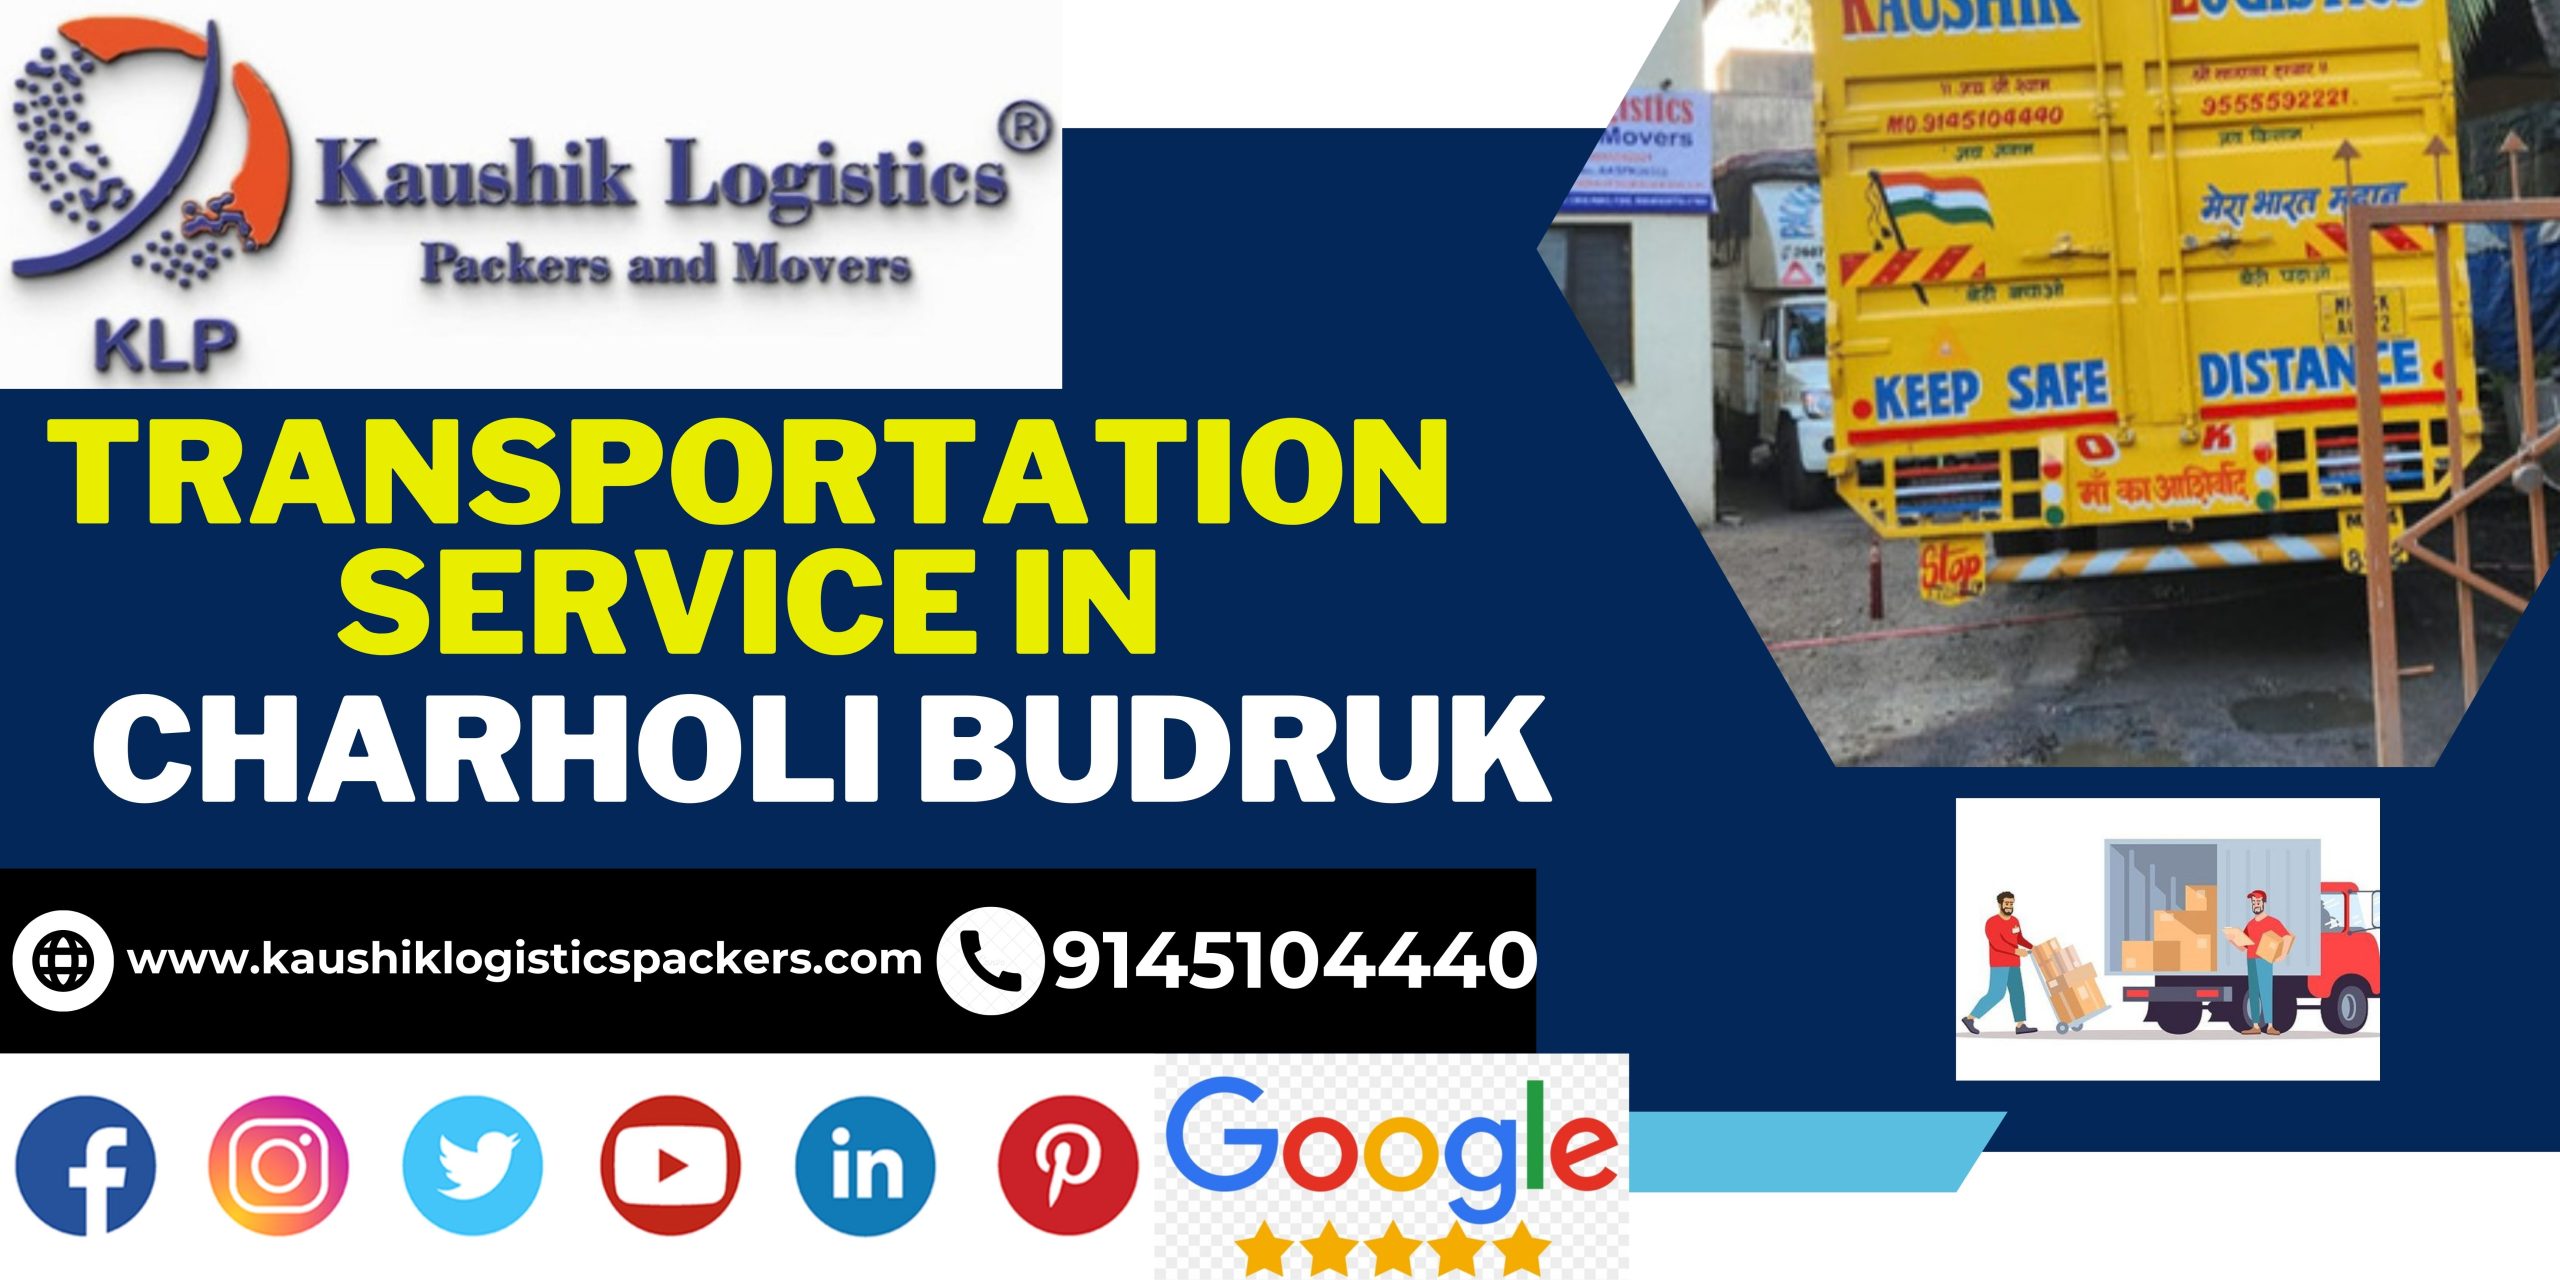 Packers and Movers In Charholi Budruk